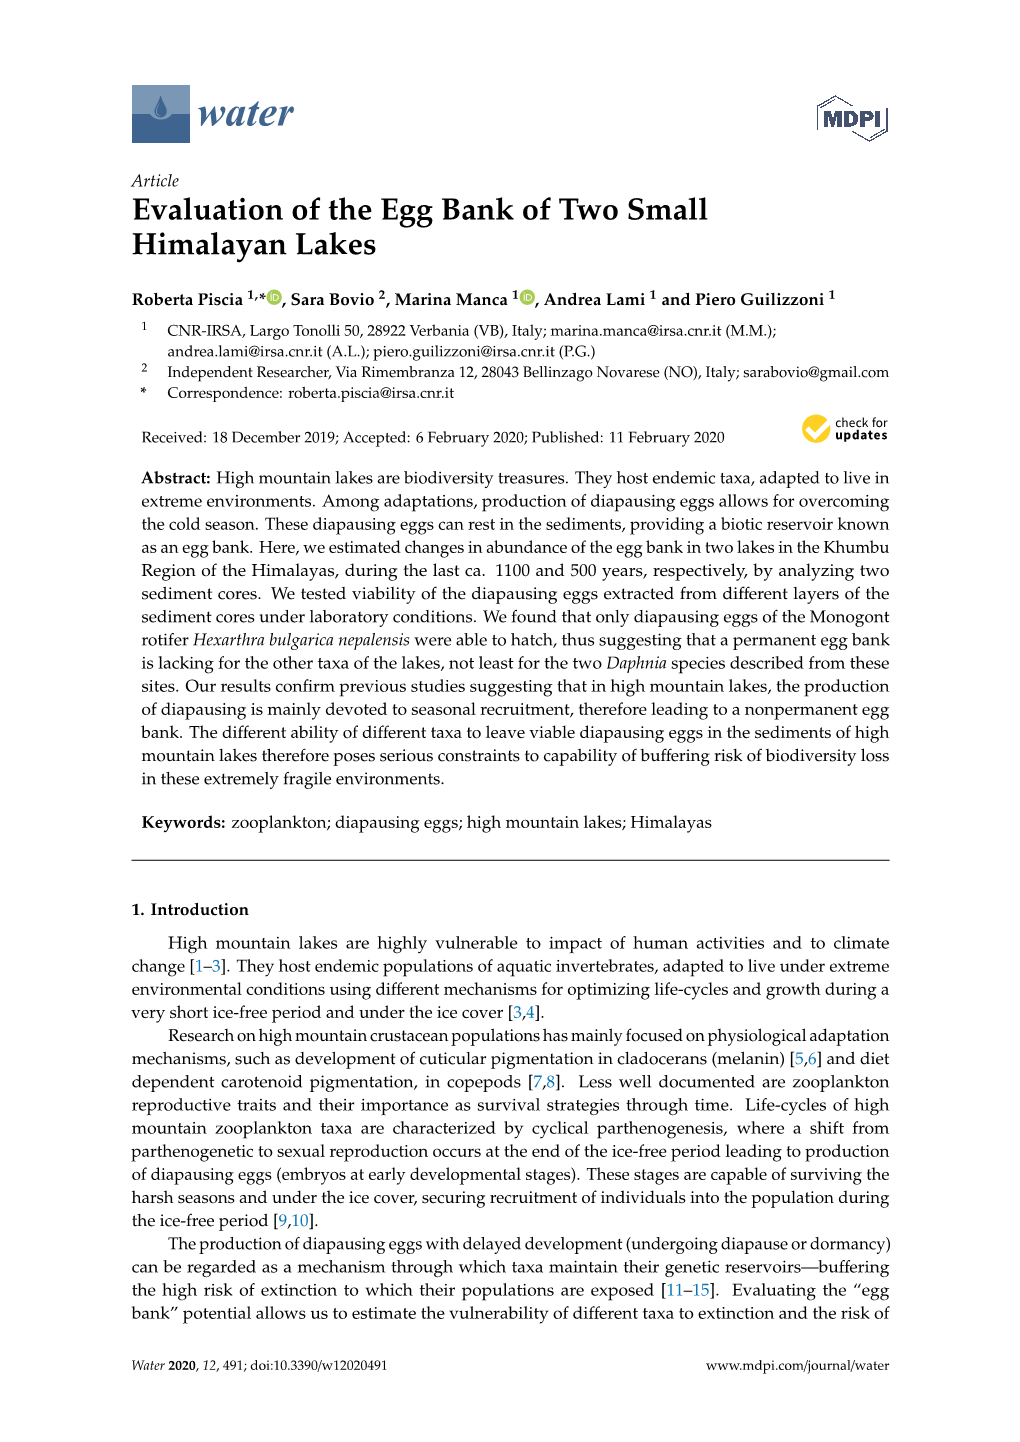 Evaluation of the Egg Bank of Two Small Himalayan Lakes